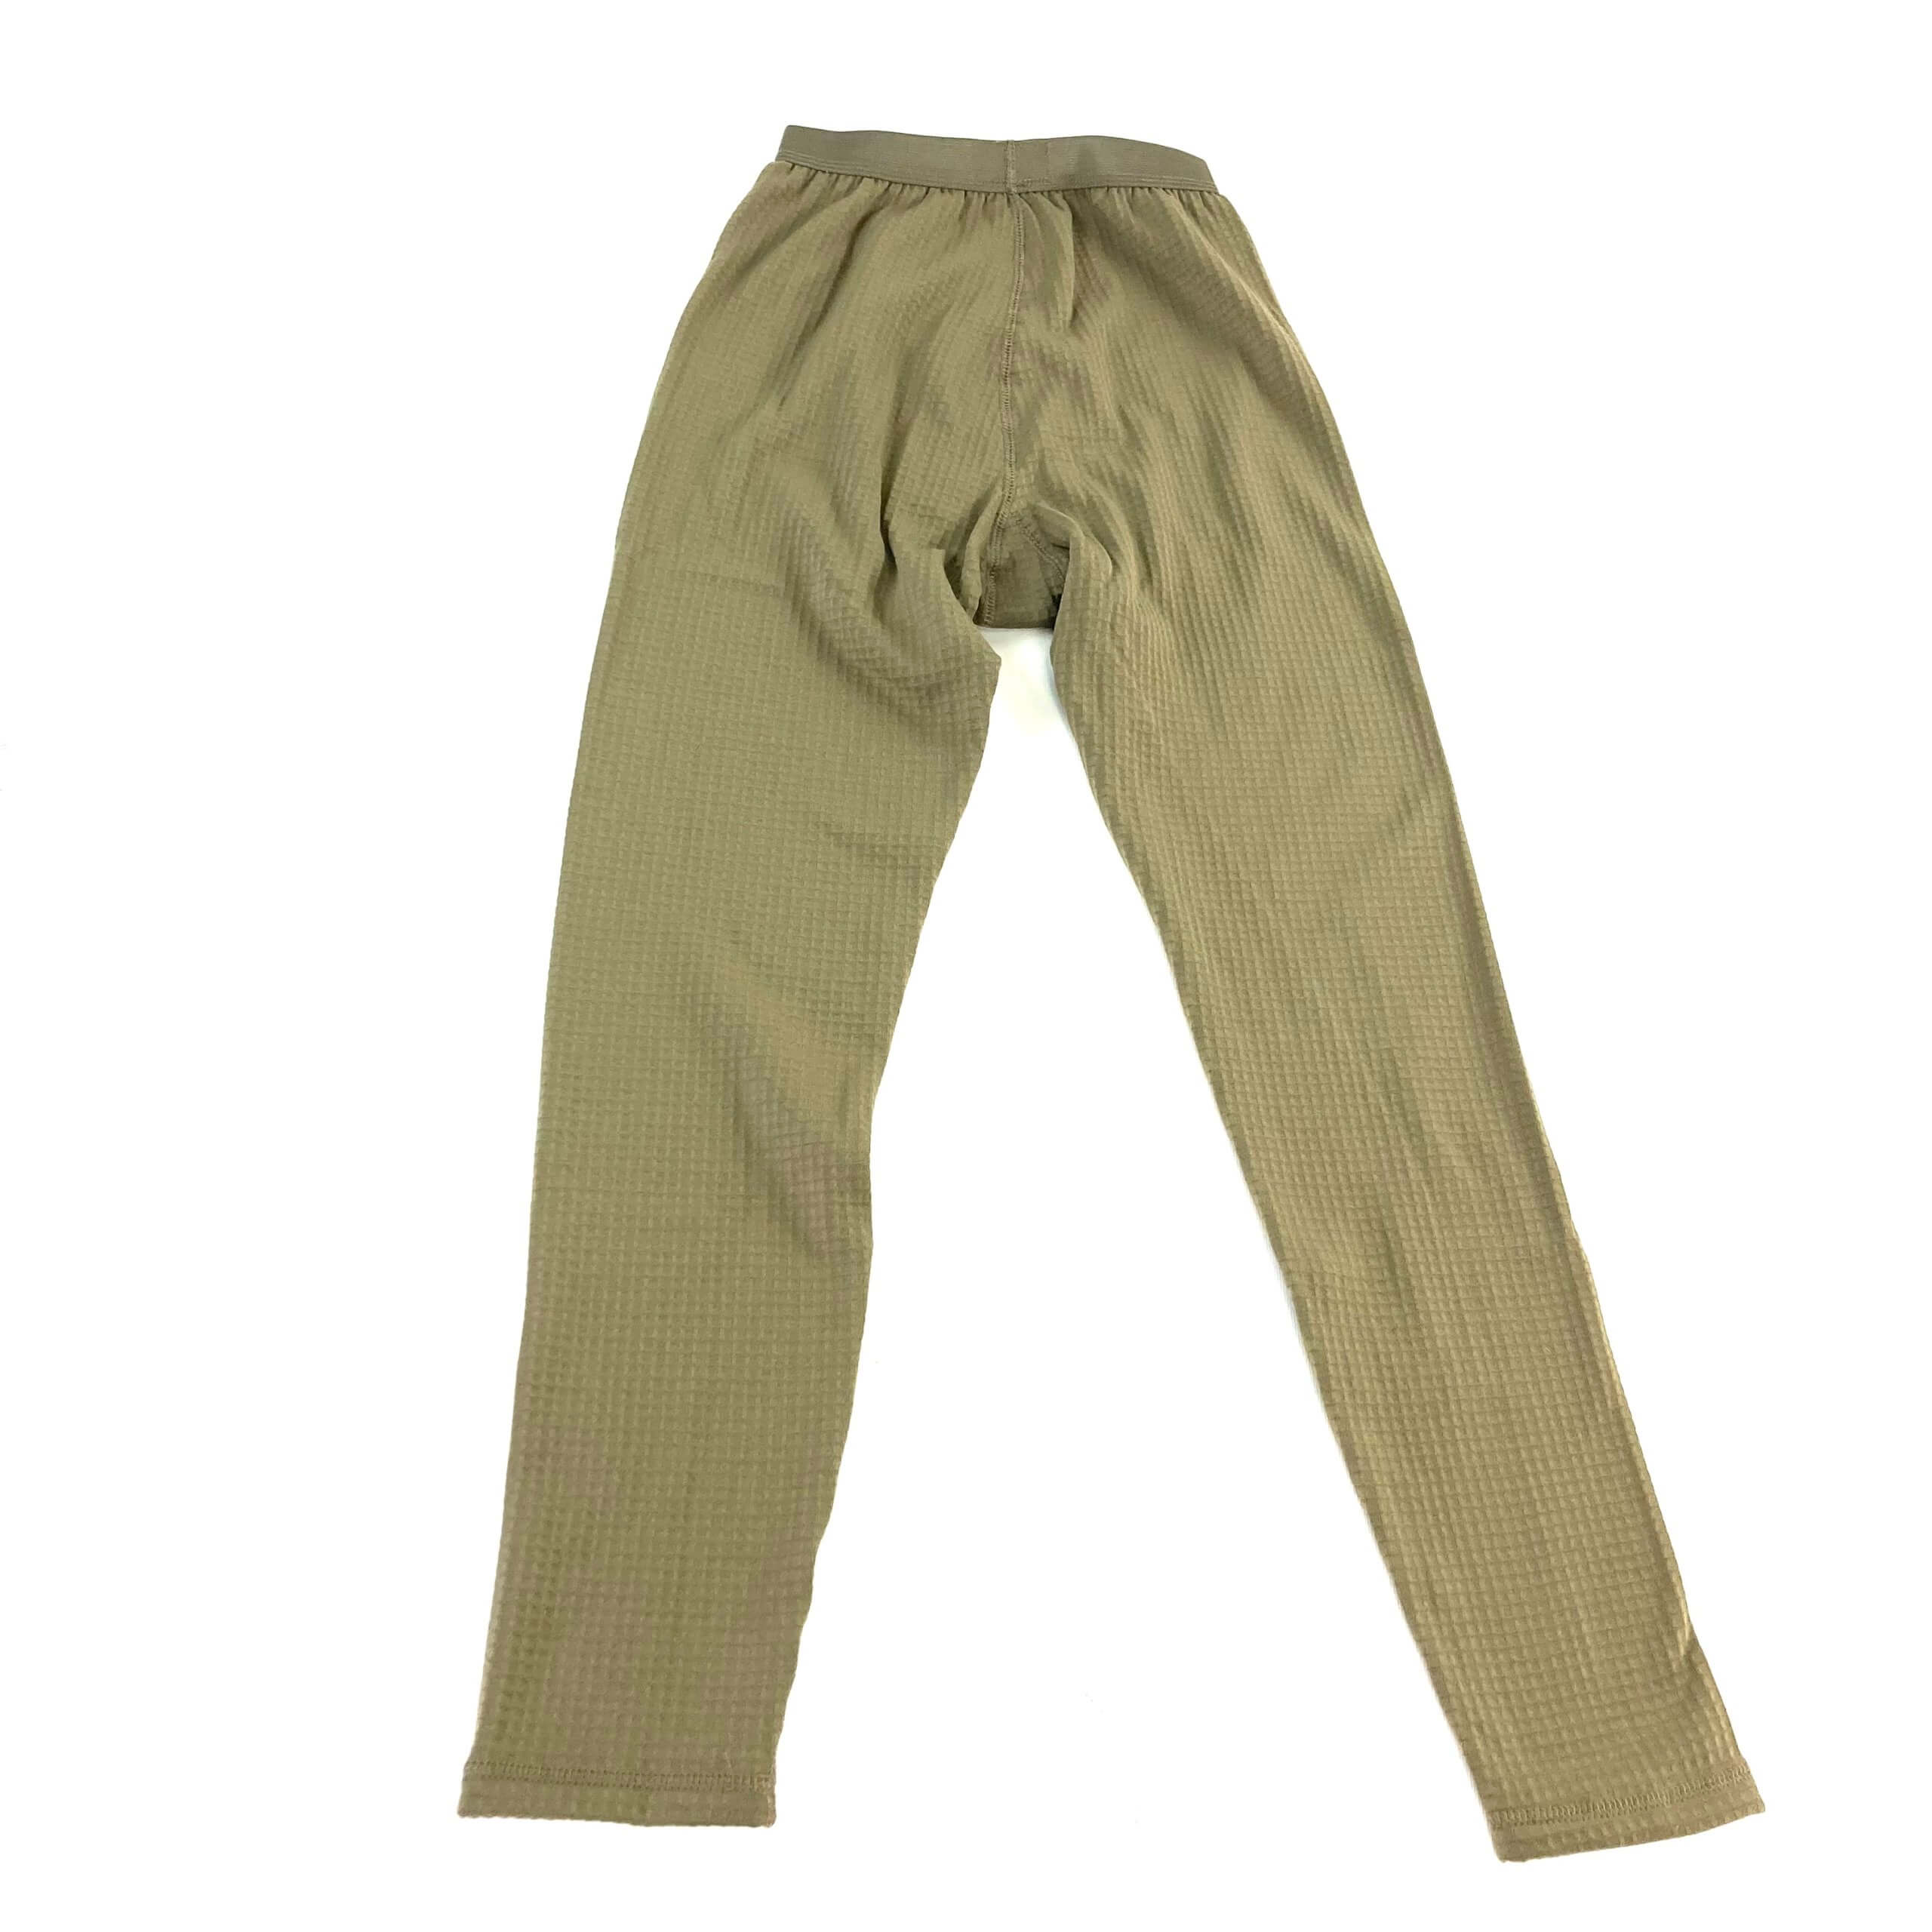 Rothco Gen III Silk Weight Bottoms, AR 670-1 Coyote Brown